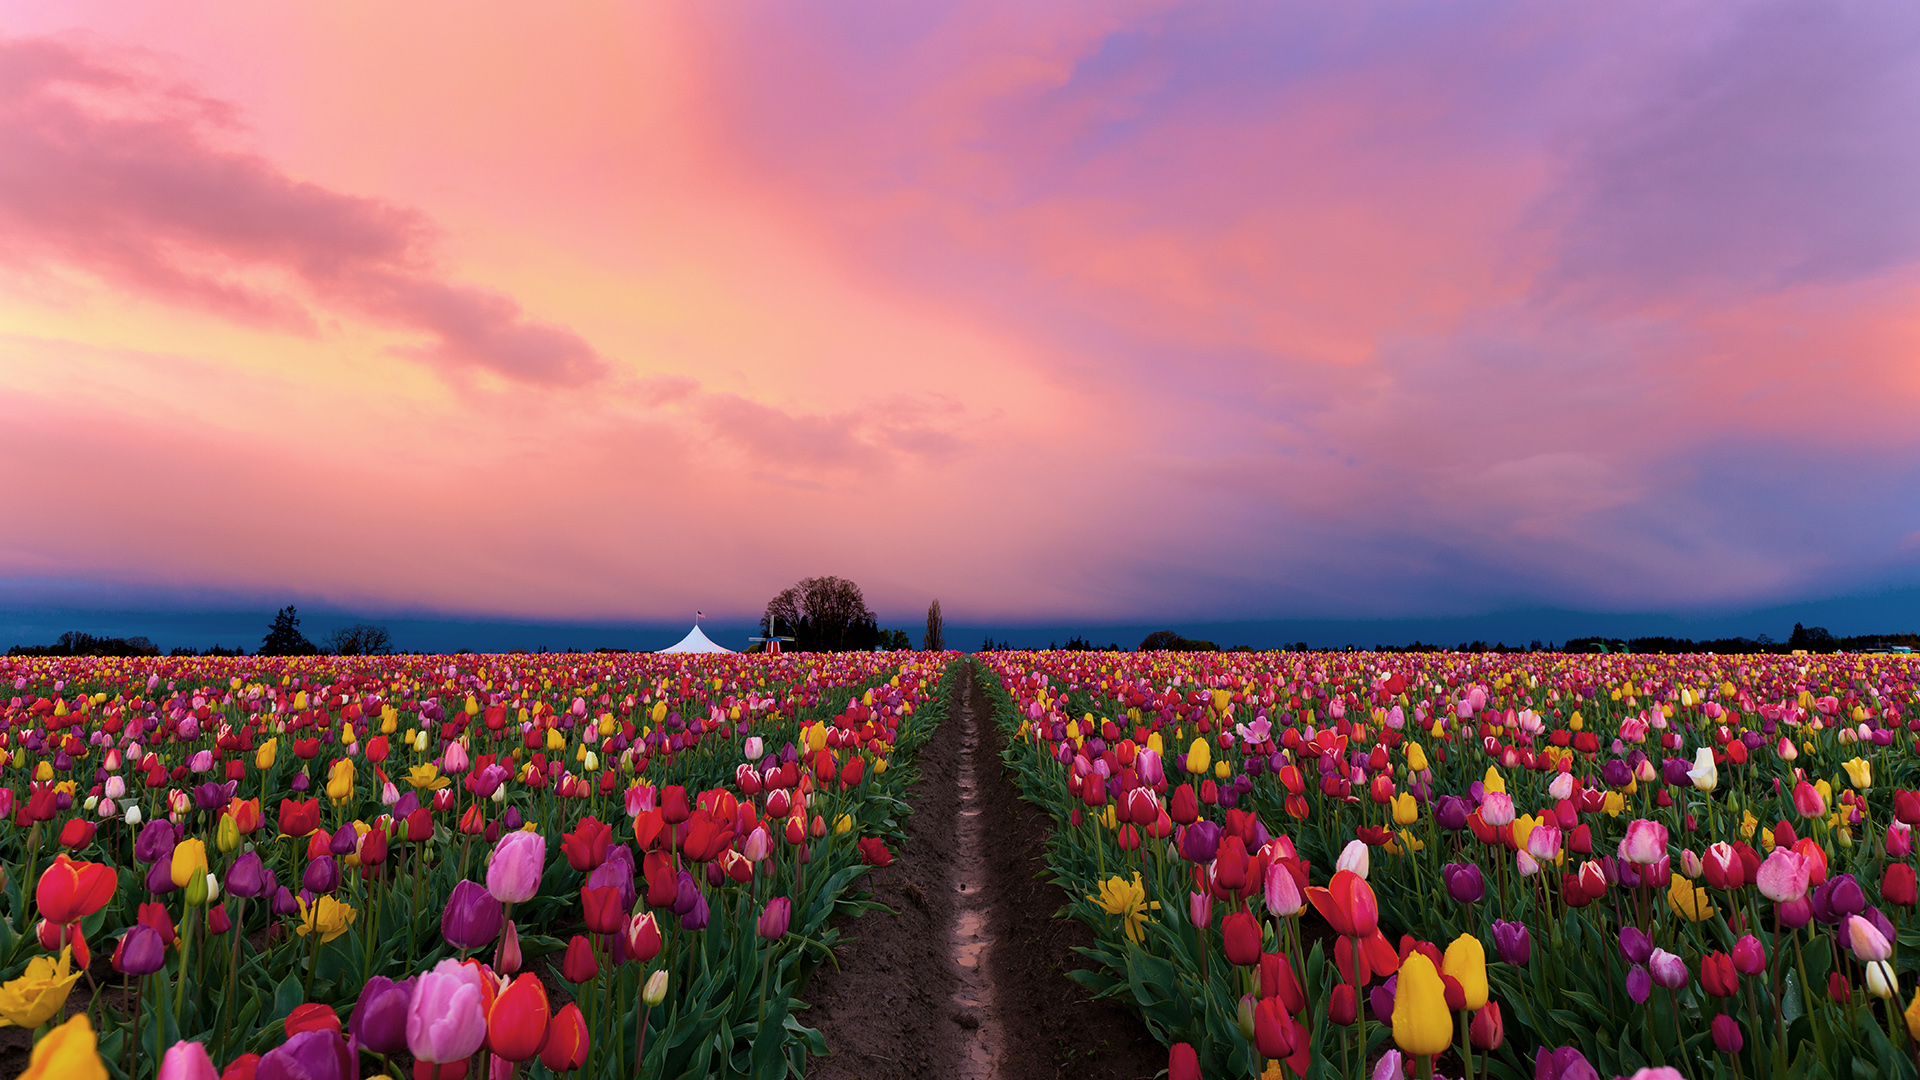 General 1920x1080 nature landscape flowers tent clouds sky field farm red flowers pink flowers yellow flowers trees Oregon USA